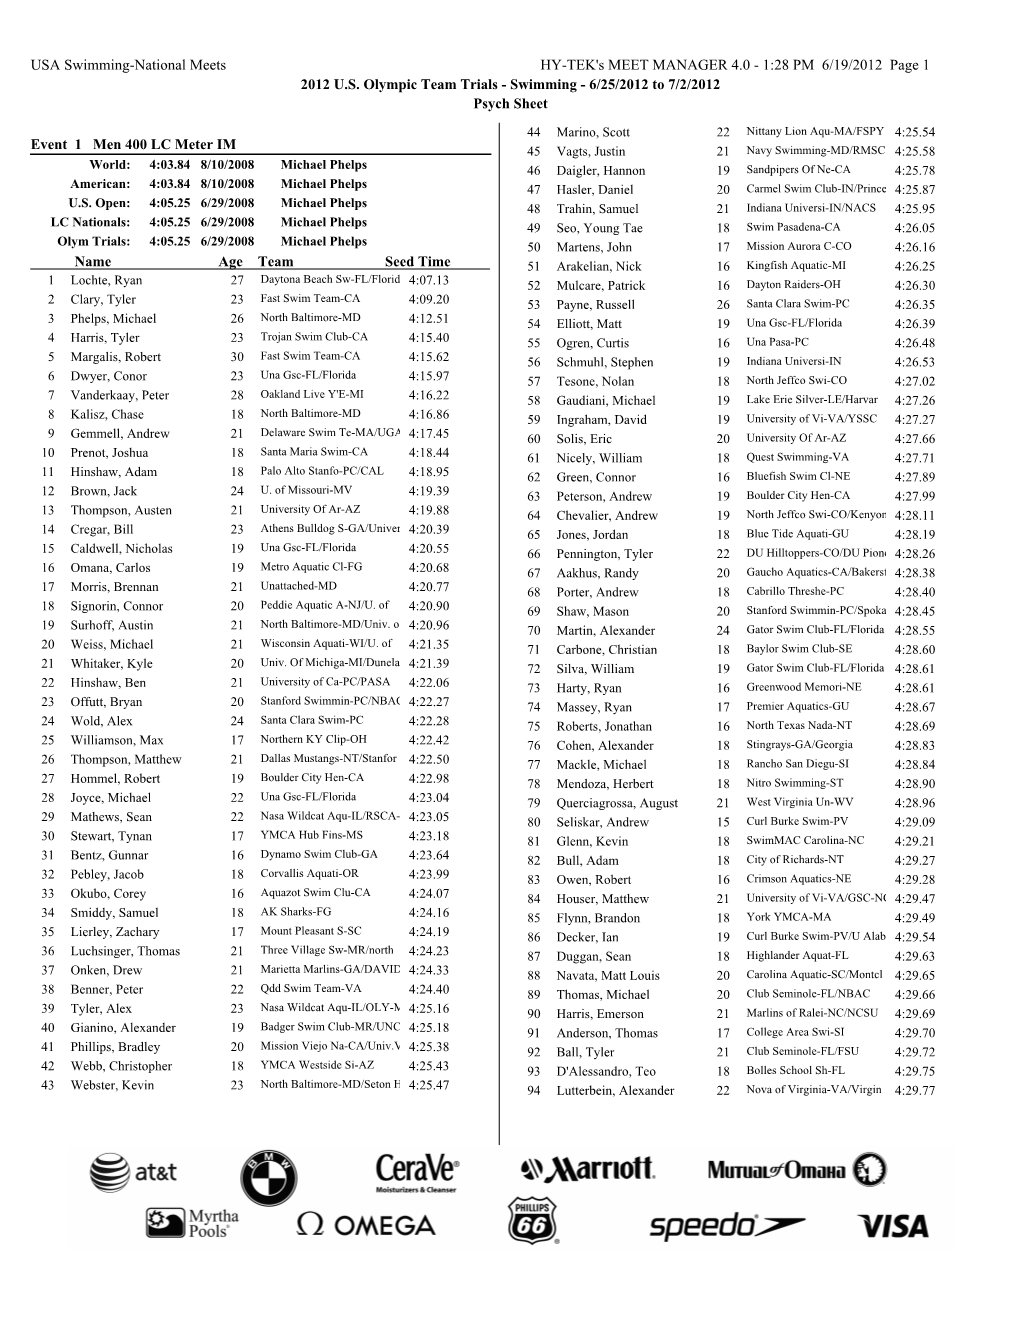 1:28 PM 6/19/2012 Page 1 2012 US Olympic Team Trials